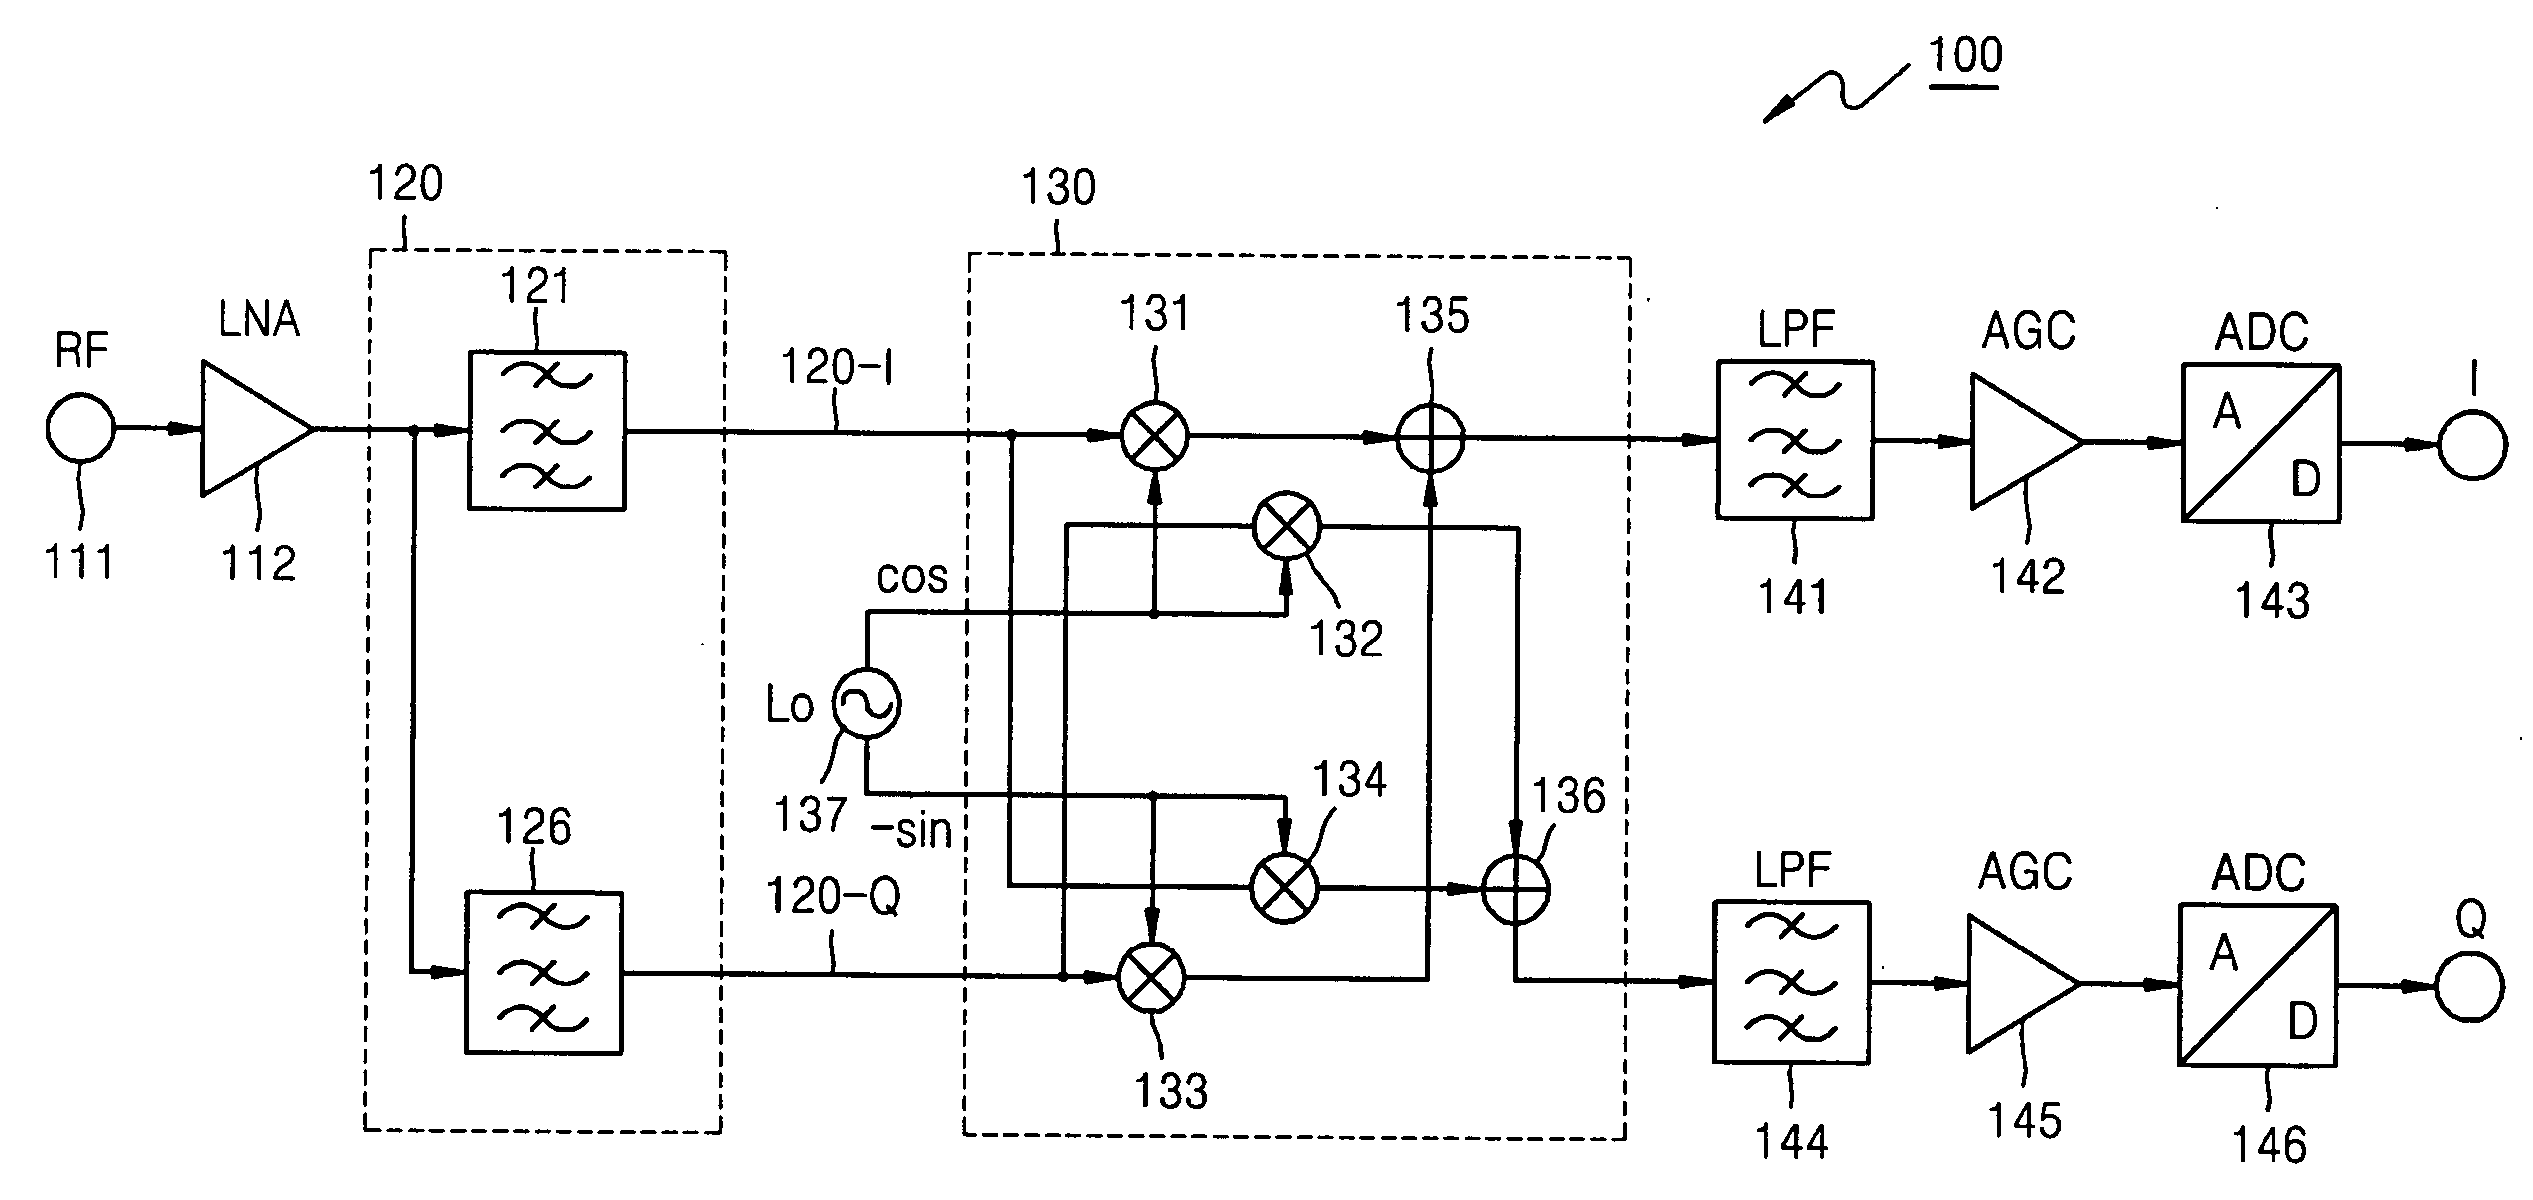 Complex coefficient transversal filter and complex frequency converter